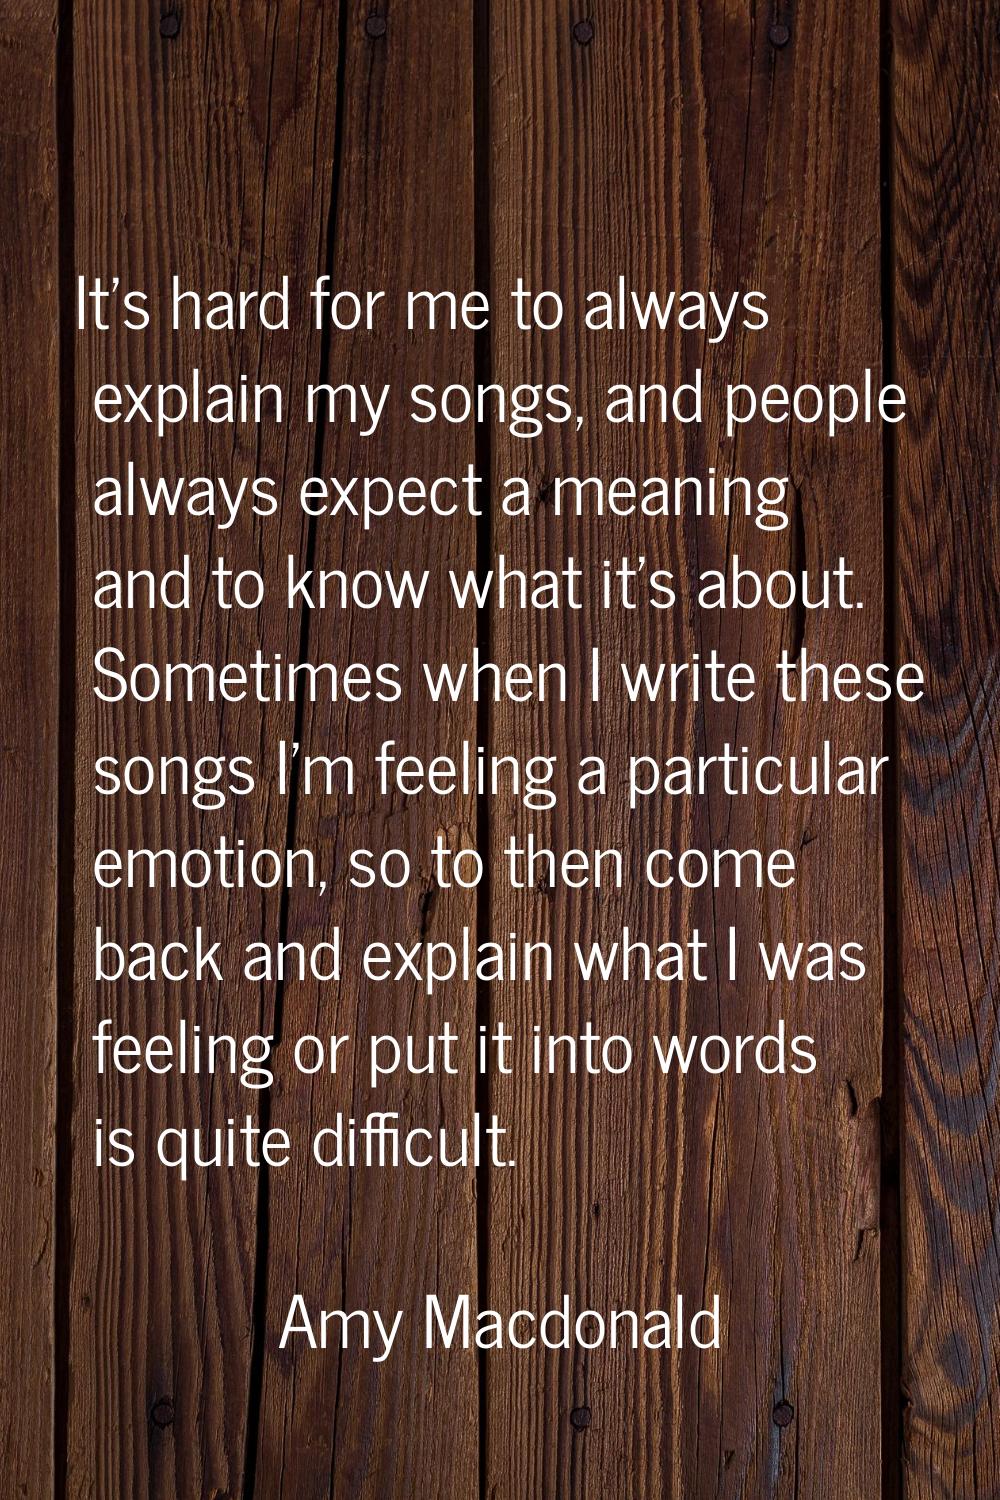 It's hard for me to always explain my songs, and people always expect a meaning and to know what it